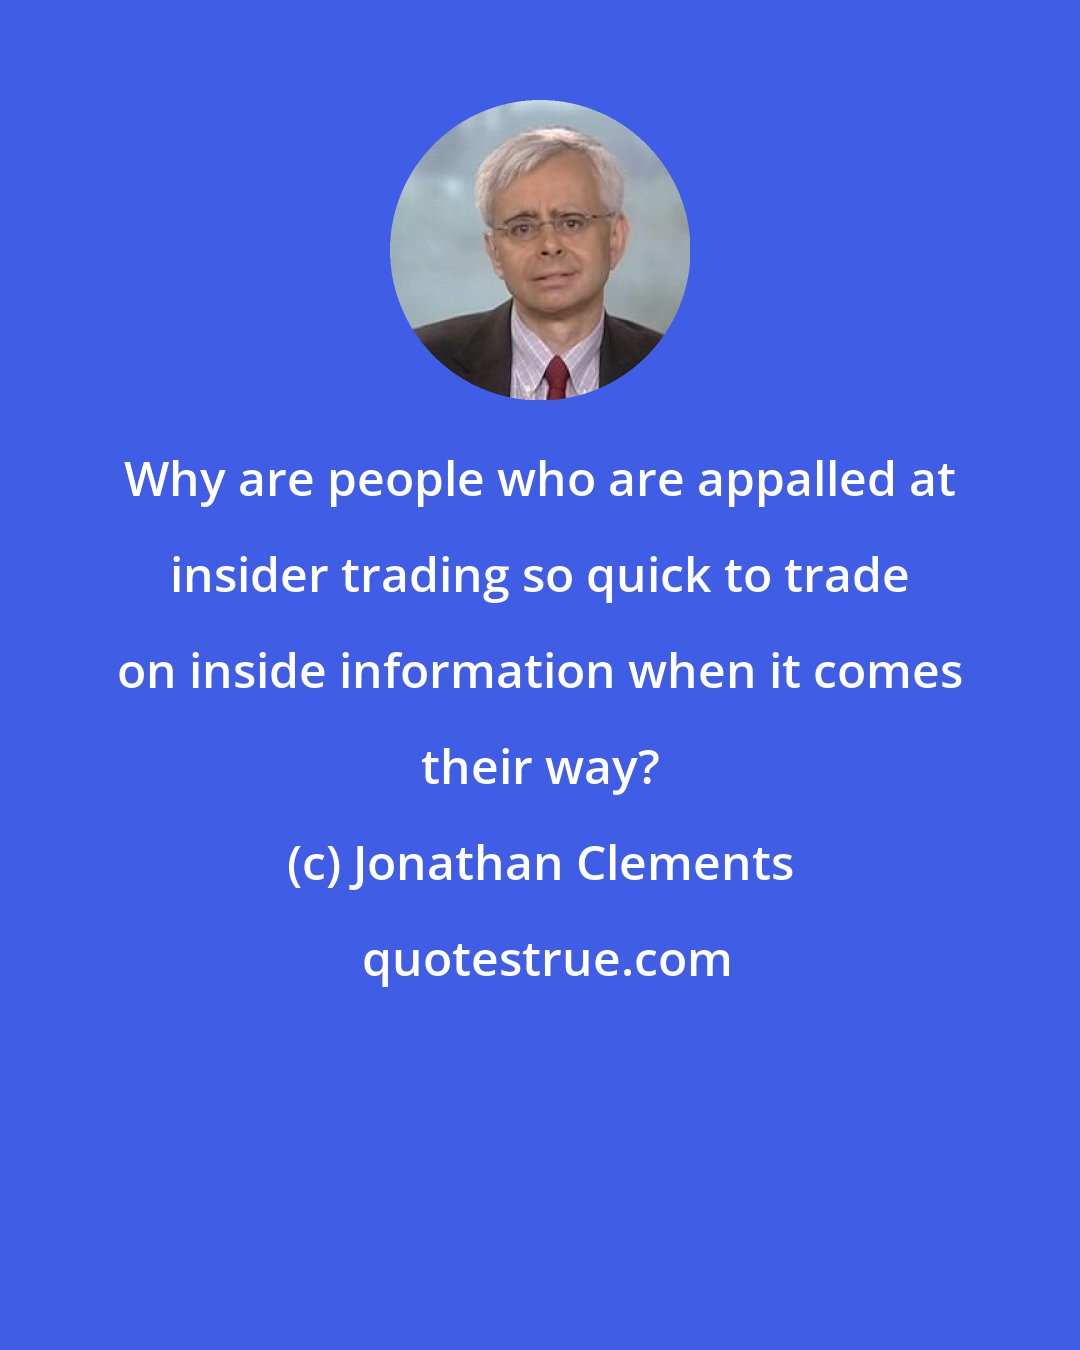 Jonathan Clements: Why are people who are appalled at insider trading so quick to trade on inside information when it comes their way?